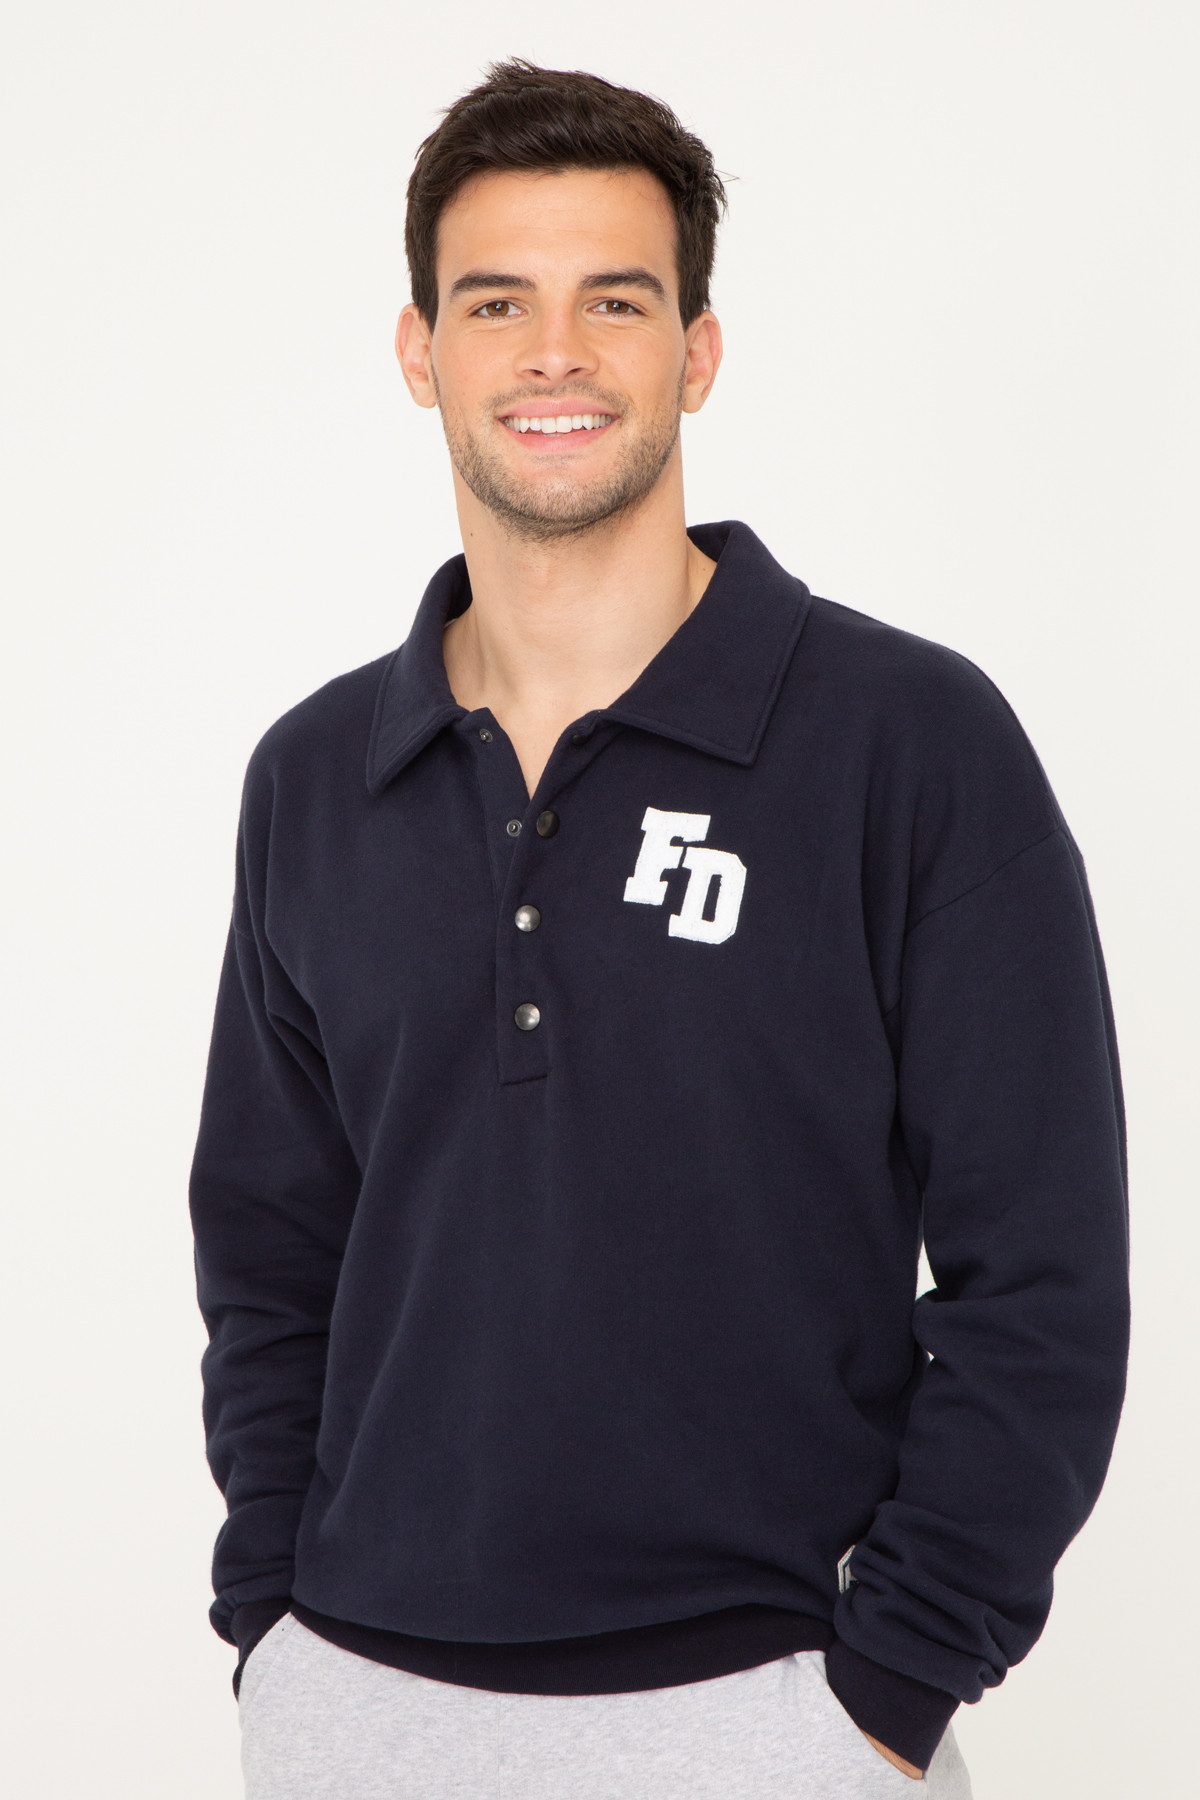 Marty FD Embroidery Sweat